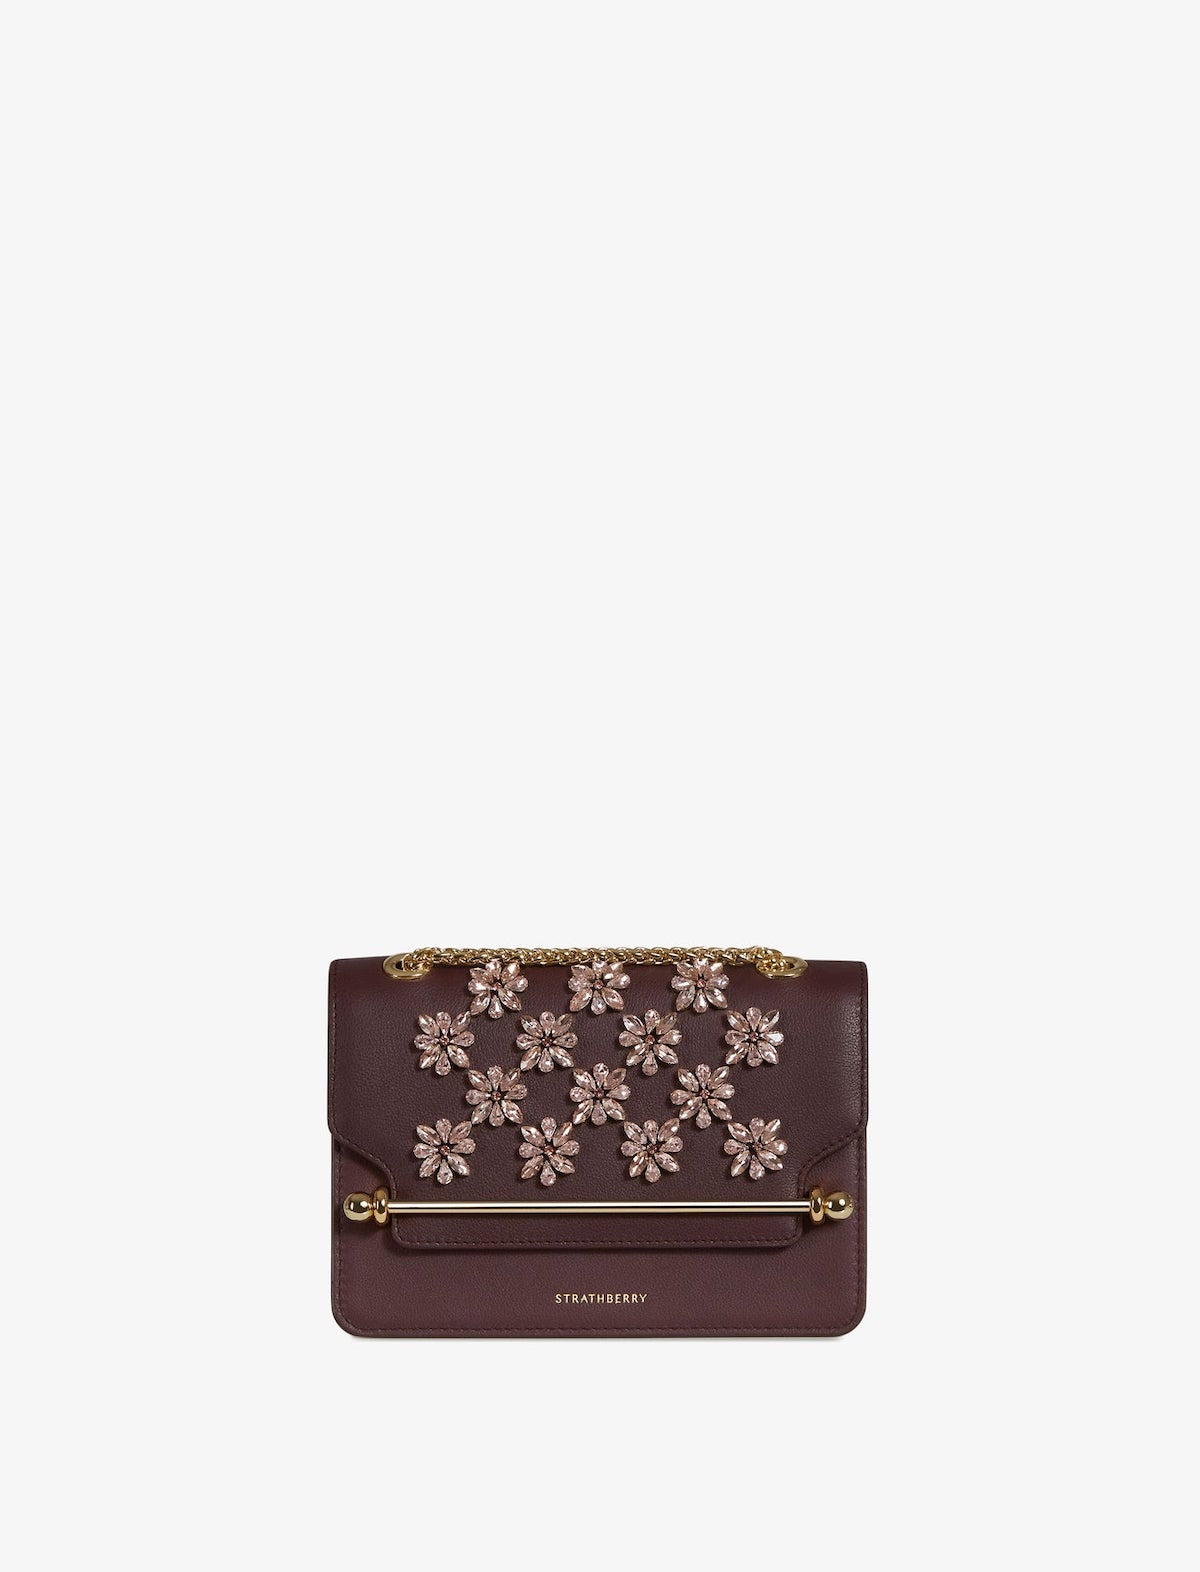 STRATHBERRY East/West Mini Bag in Floral Embroidered Burgundy